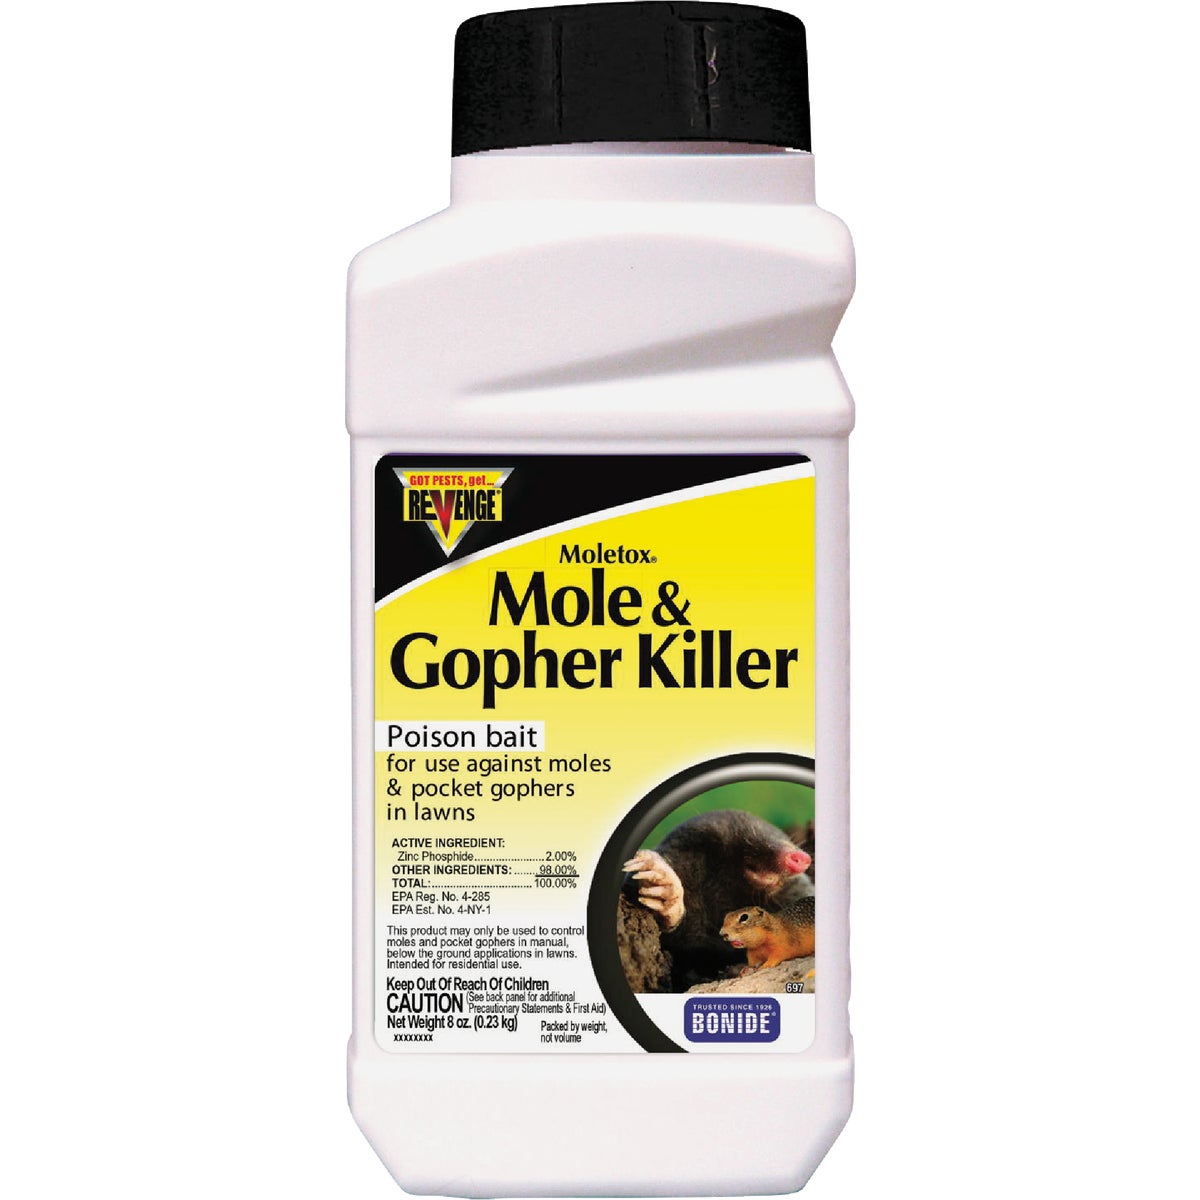 Item 712857, Kill and control moles and pocket gophers in your lawn with Moletox Mole &